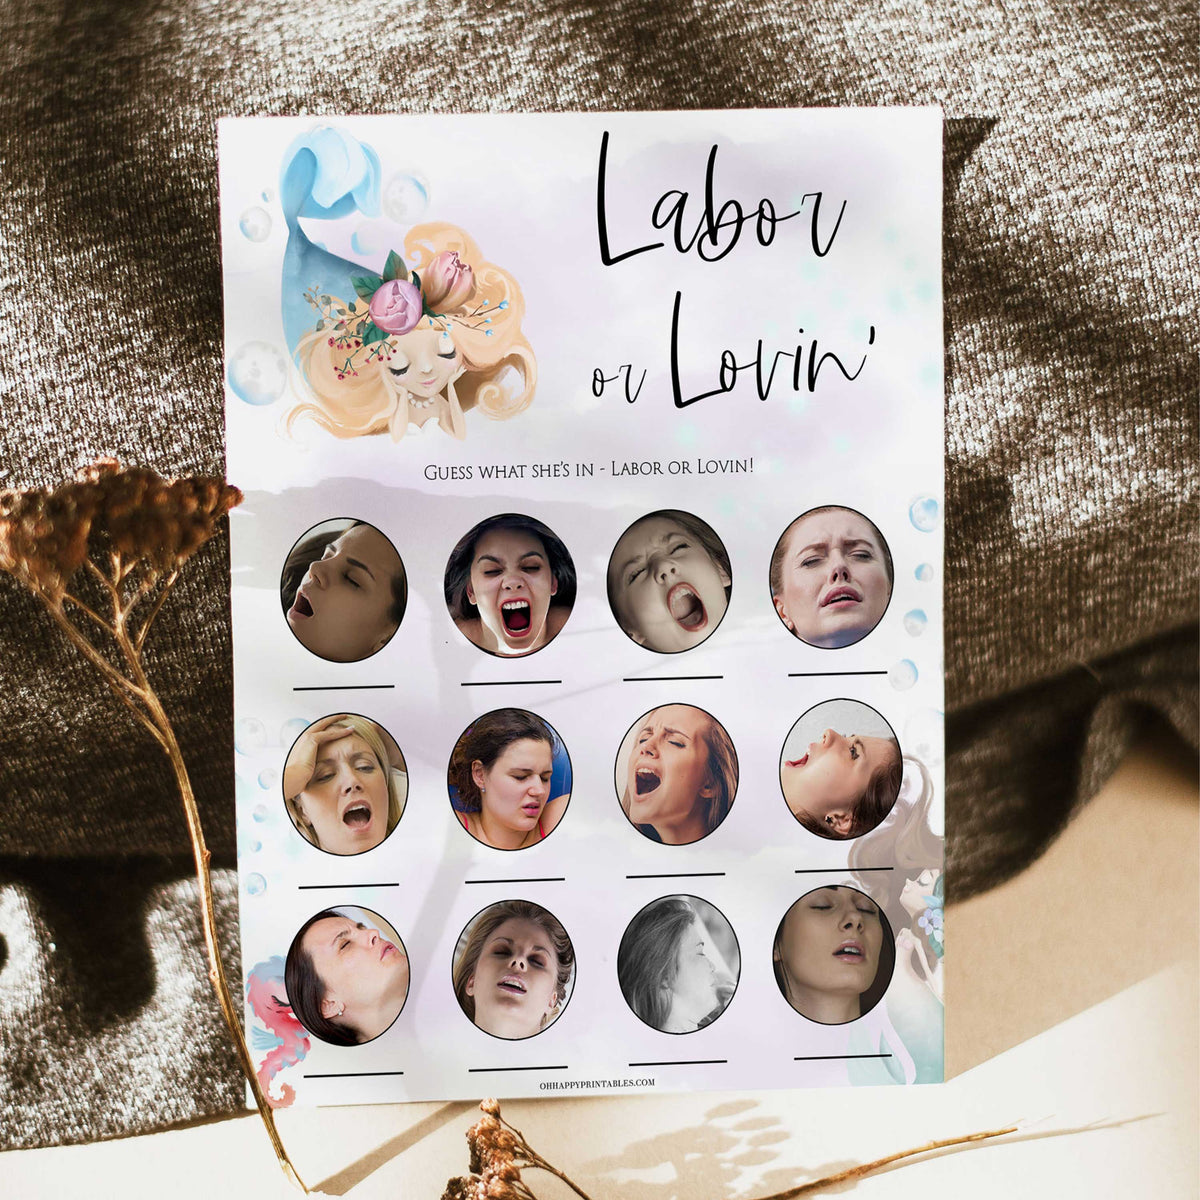 labor or lovin, porn or labor game, Printable baby shower games, little mermaid baby games, baby shower games, fun baby shower ideas, top baby shower ideas, little mermaid baby shower, baby shower games, pink hearts baby shower ideas